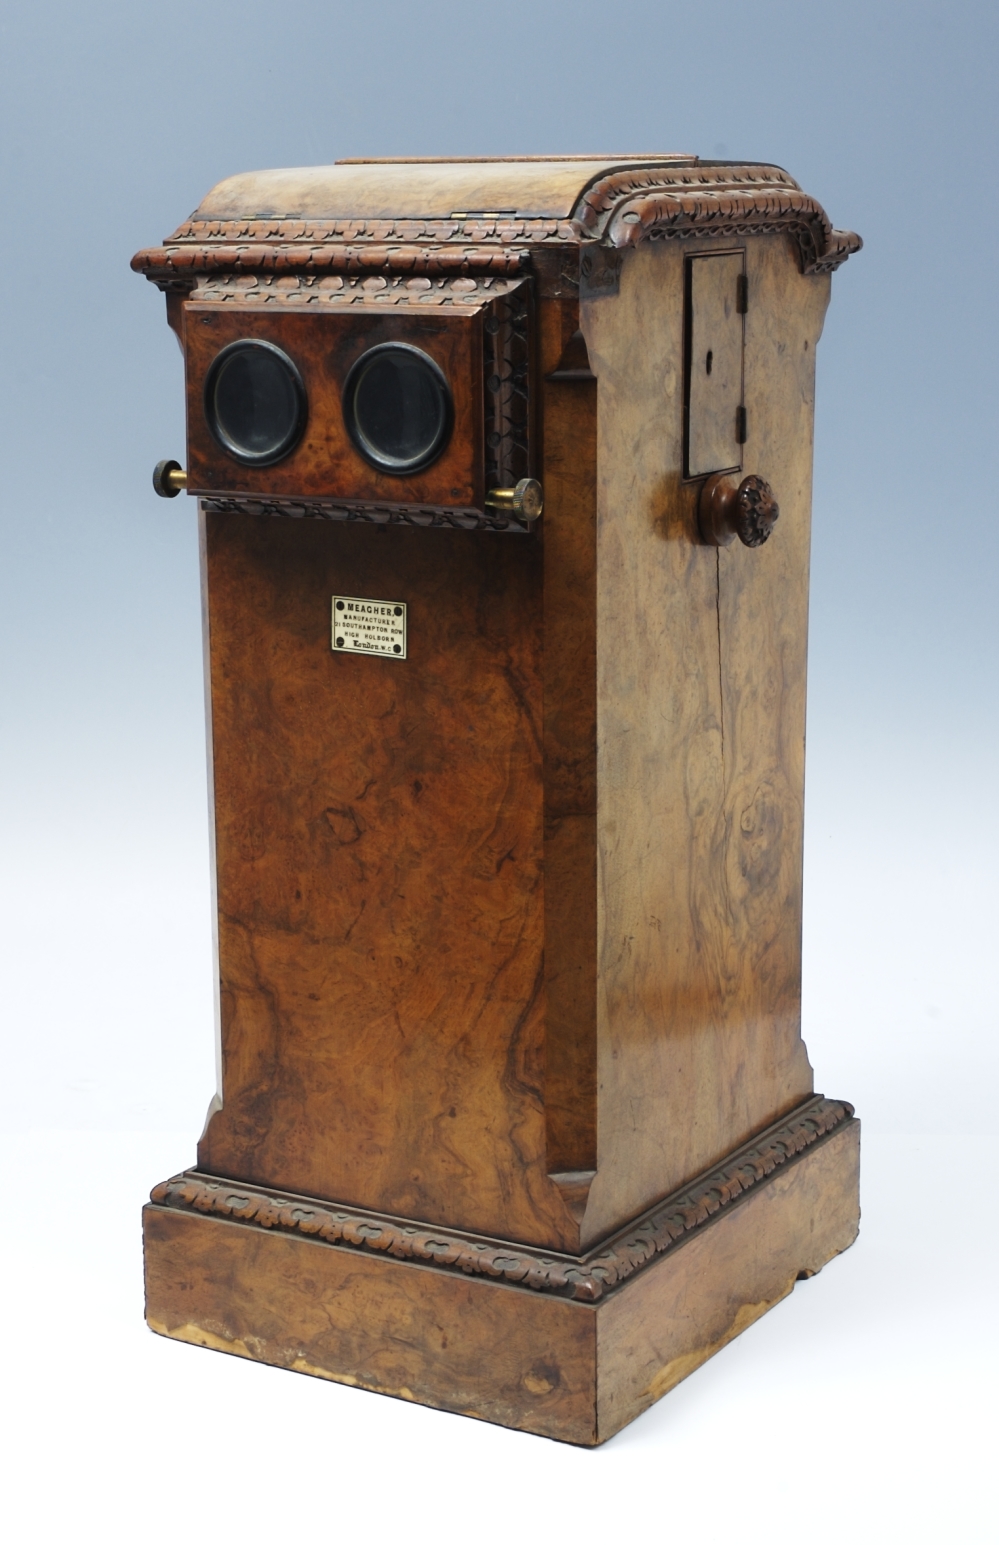 preview image for Table Model Stereoscope, by Meagher, London, Probably 1860s